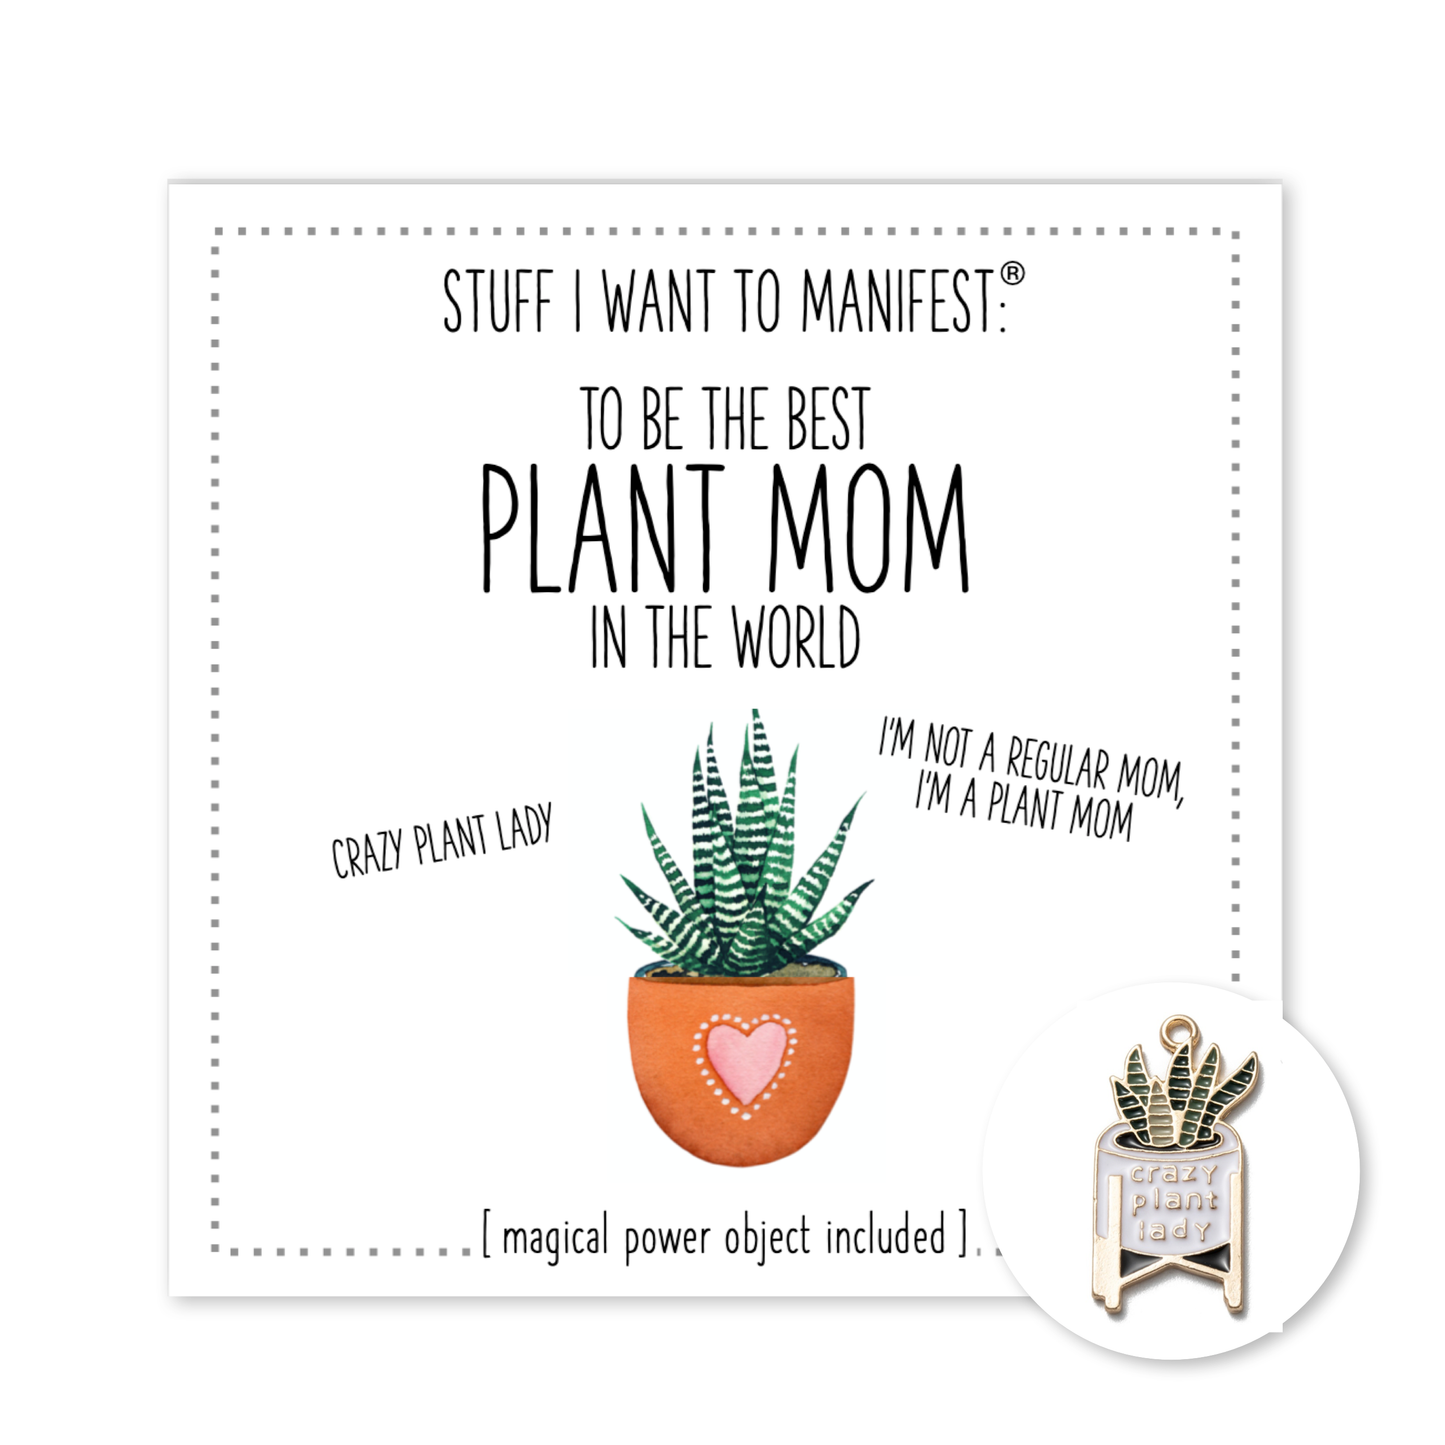 Stuff I Want To Manifest : TO BE THE BEST PLANT MOM